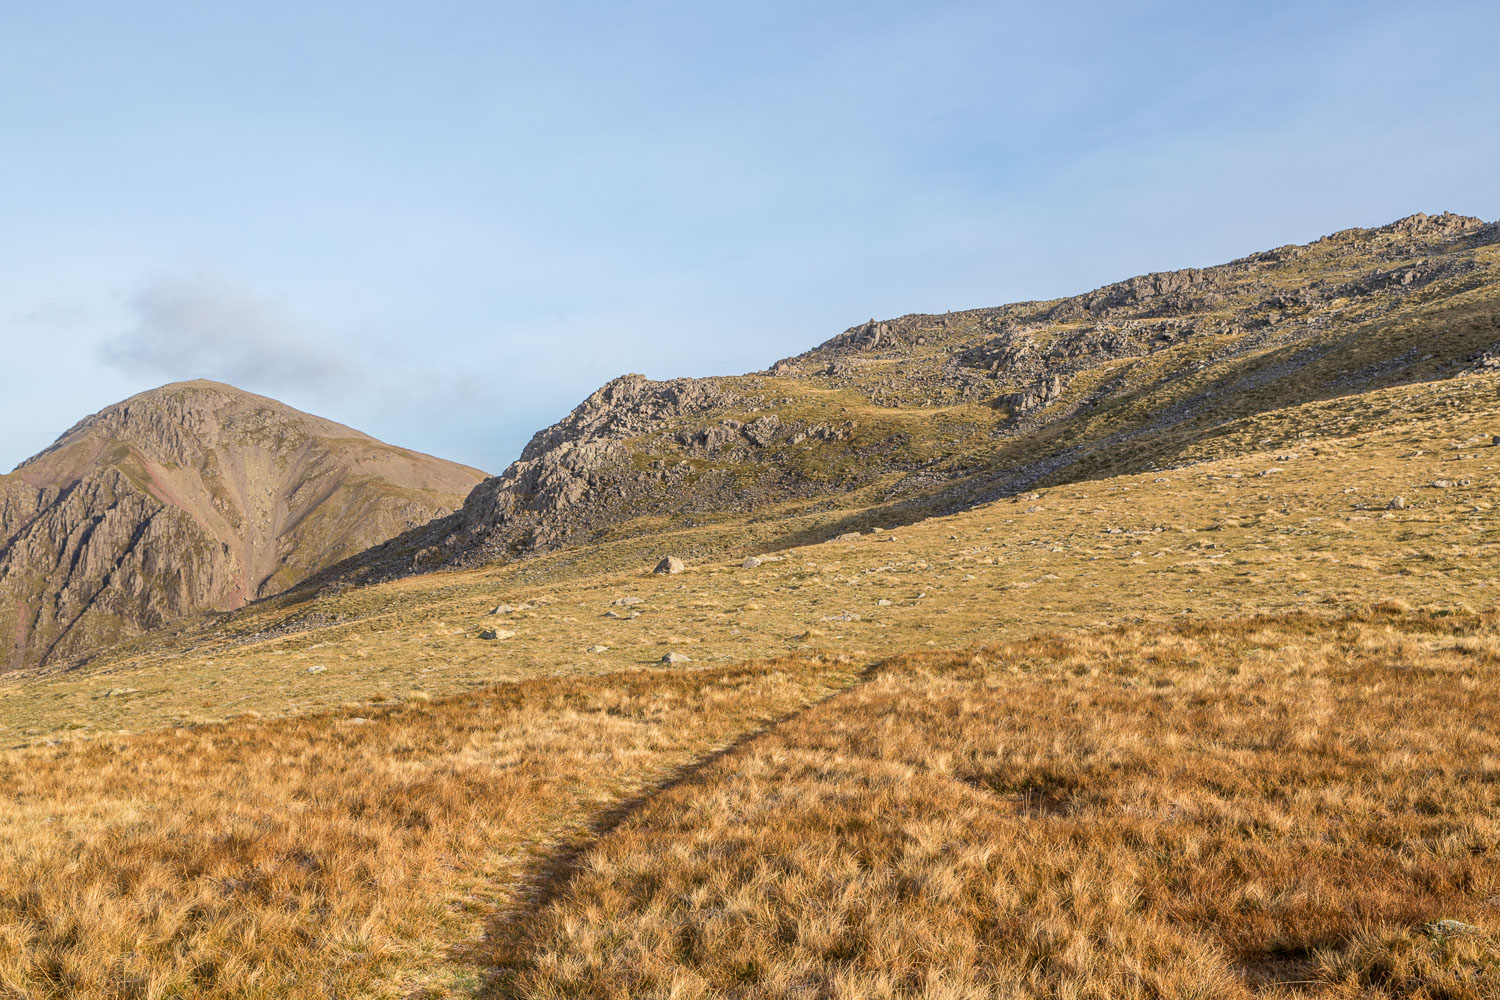 Lingmell, Goat Crags